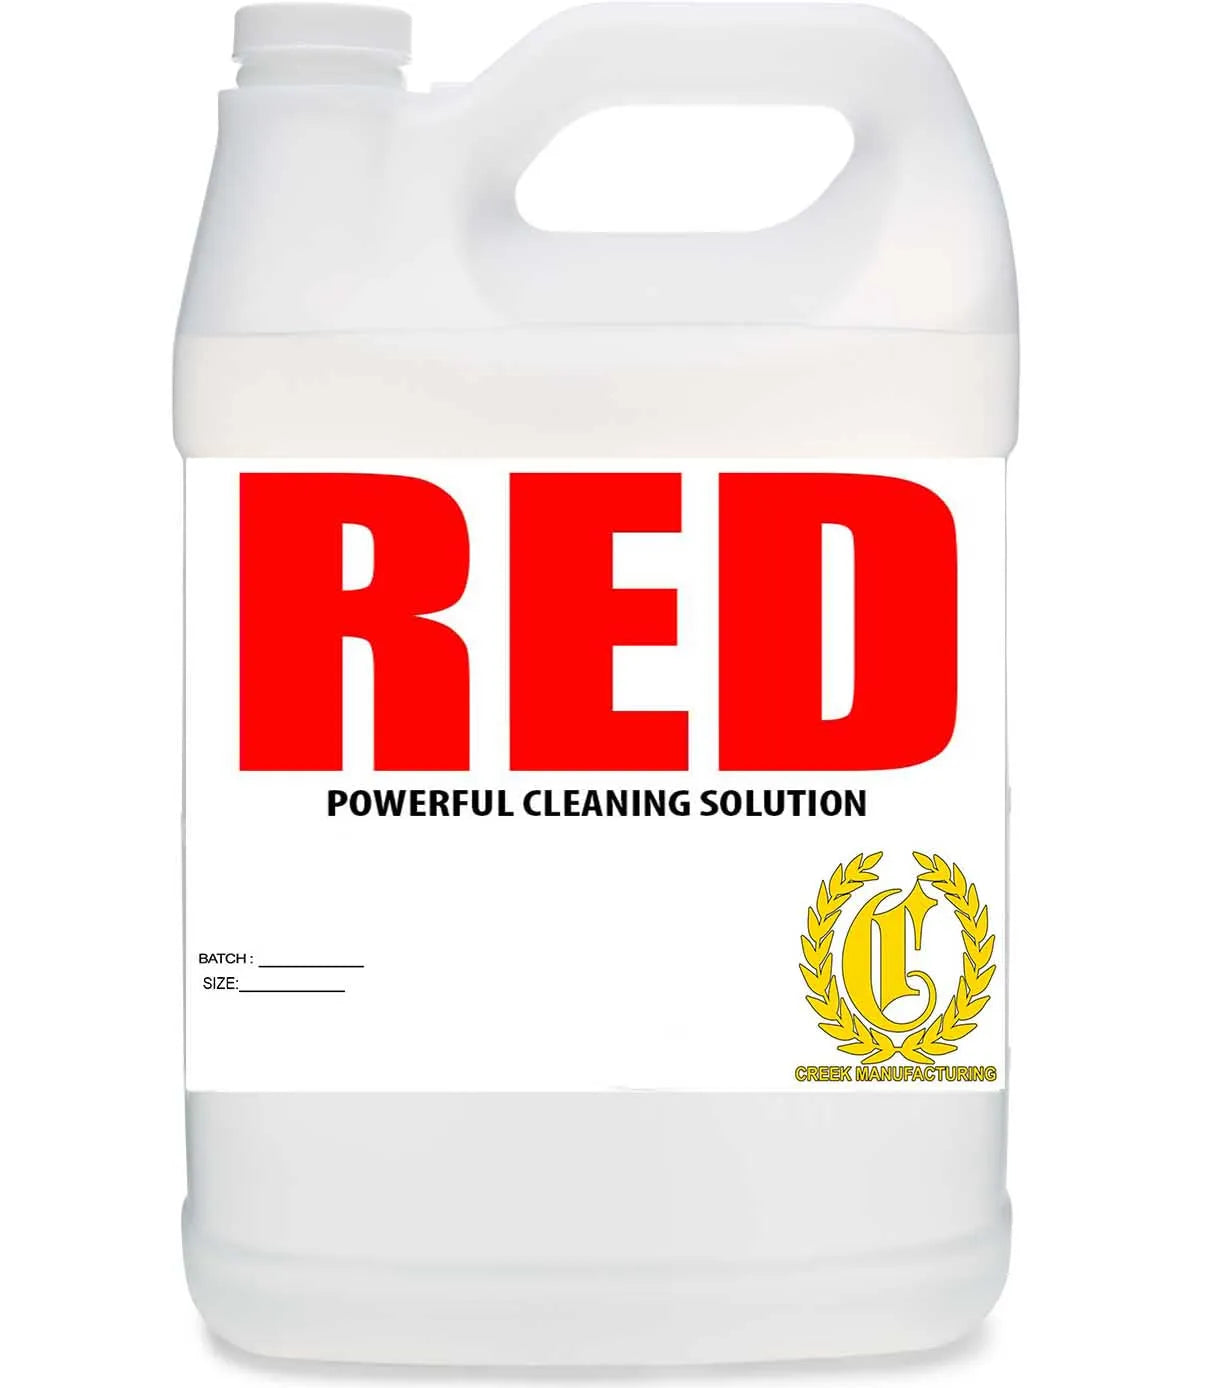 RED Aggressive Cleaning Solution